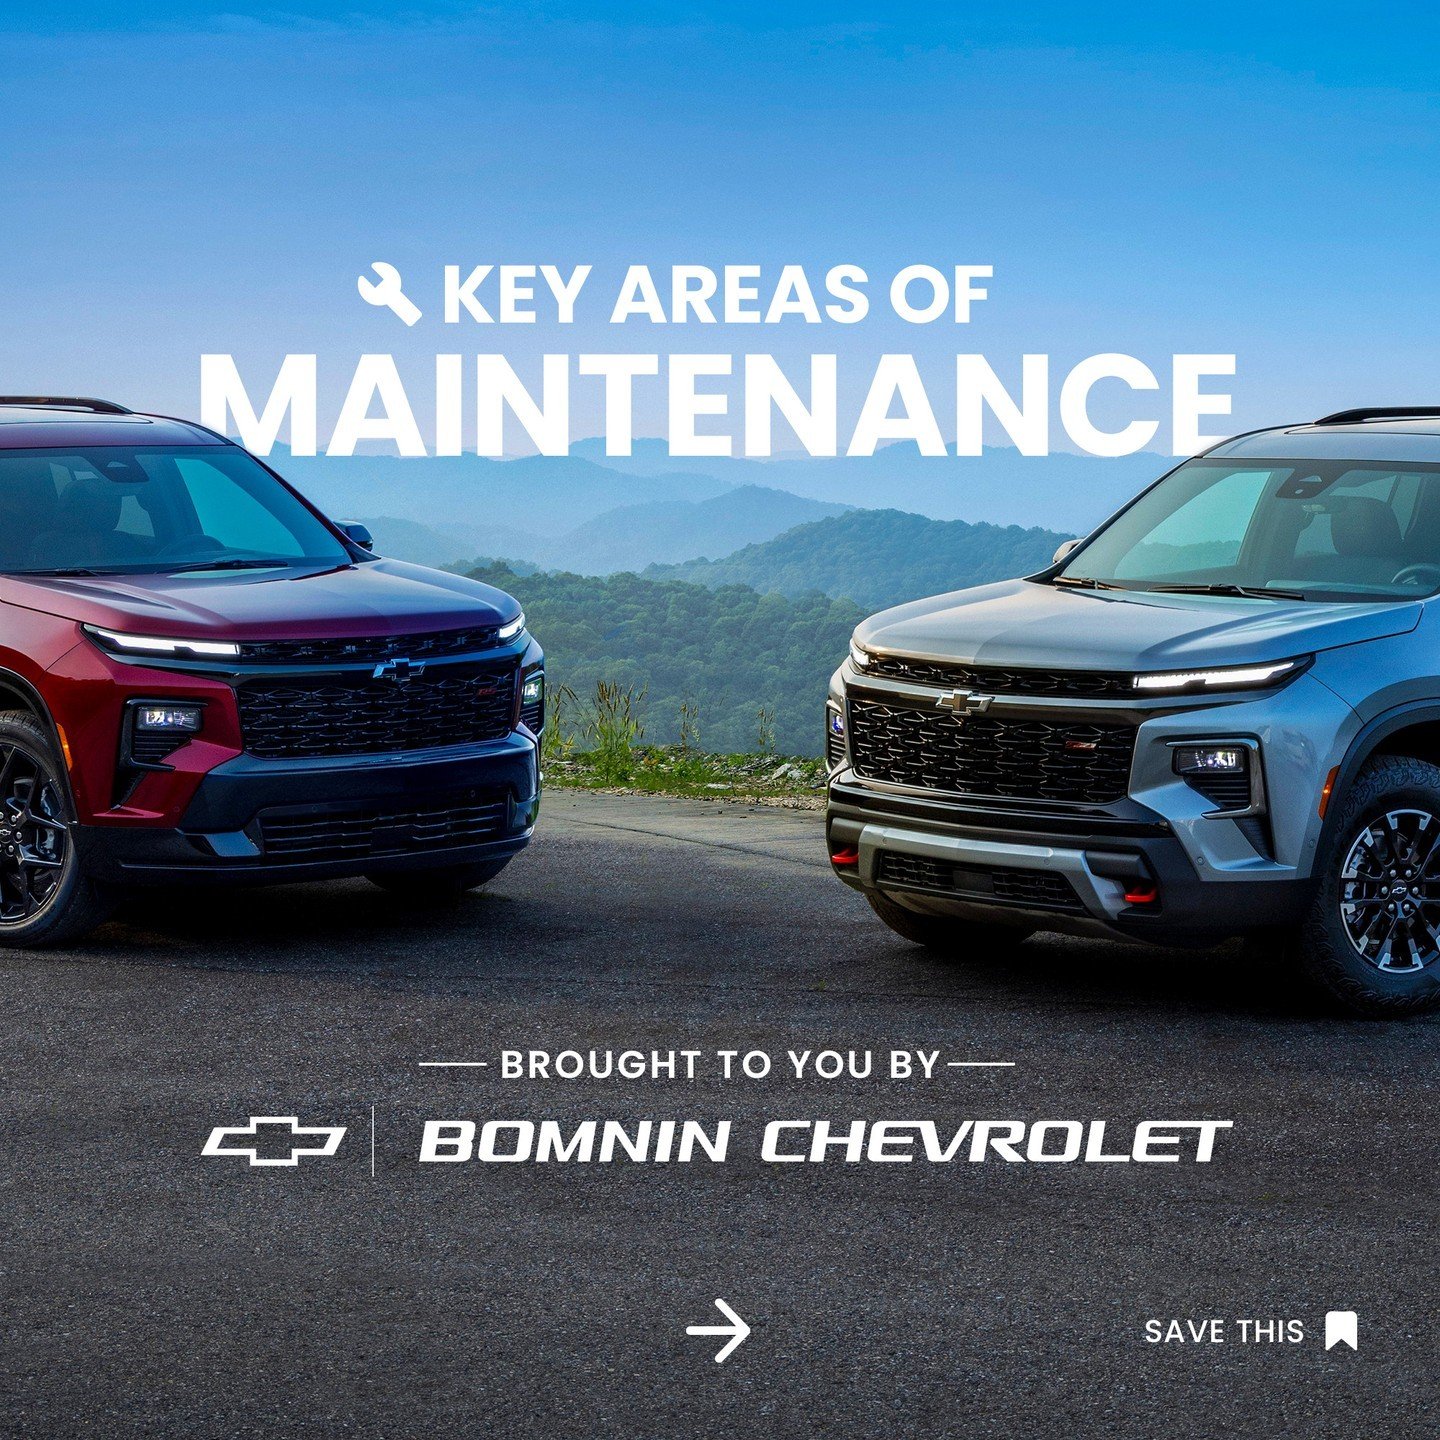 Click the link in our bio to schedule your service appointment today! Let our expert technicians take care of your vehicle! 🛠️✨

Staying on top of maintenance is crucial for optimal performance and safety.

#ChevroletMaintenance #ScheduleService #Bo